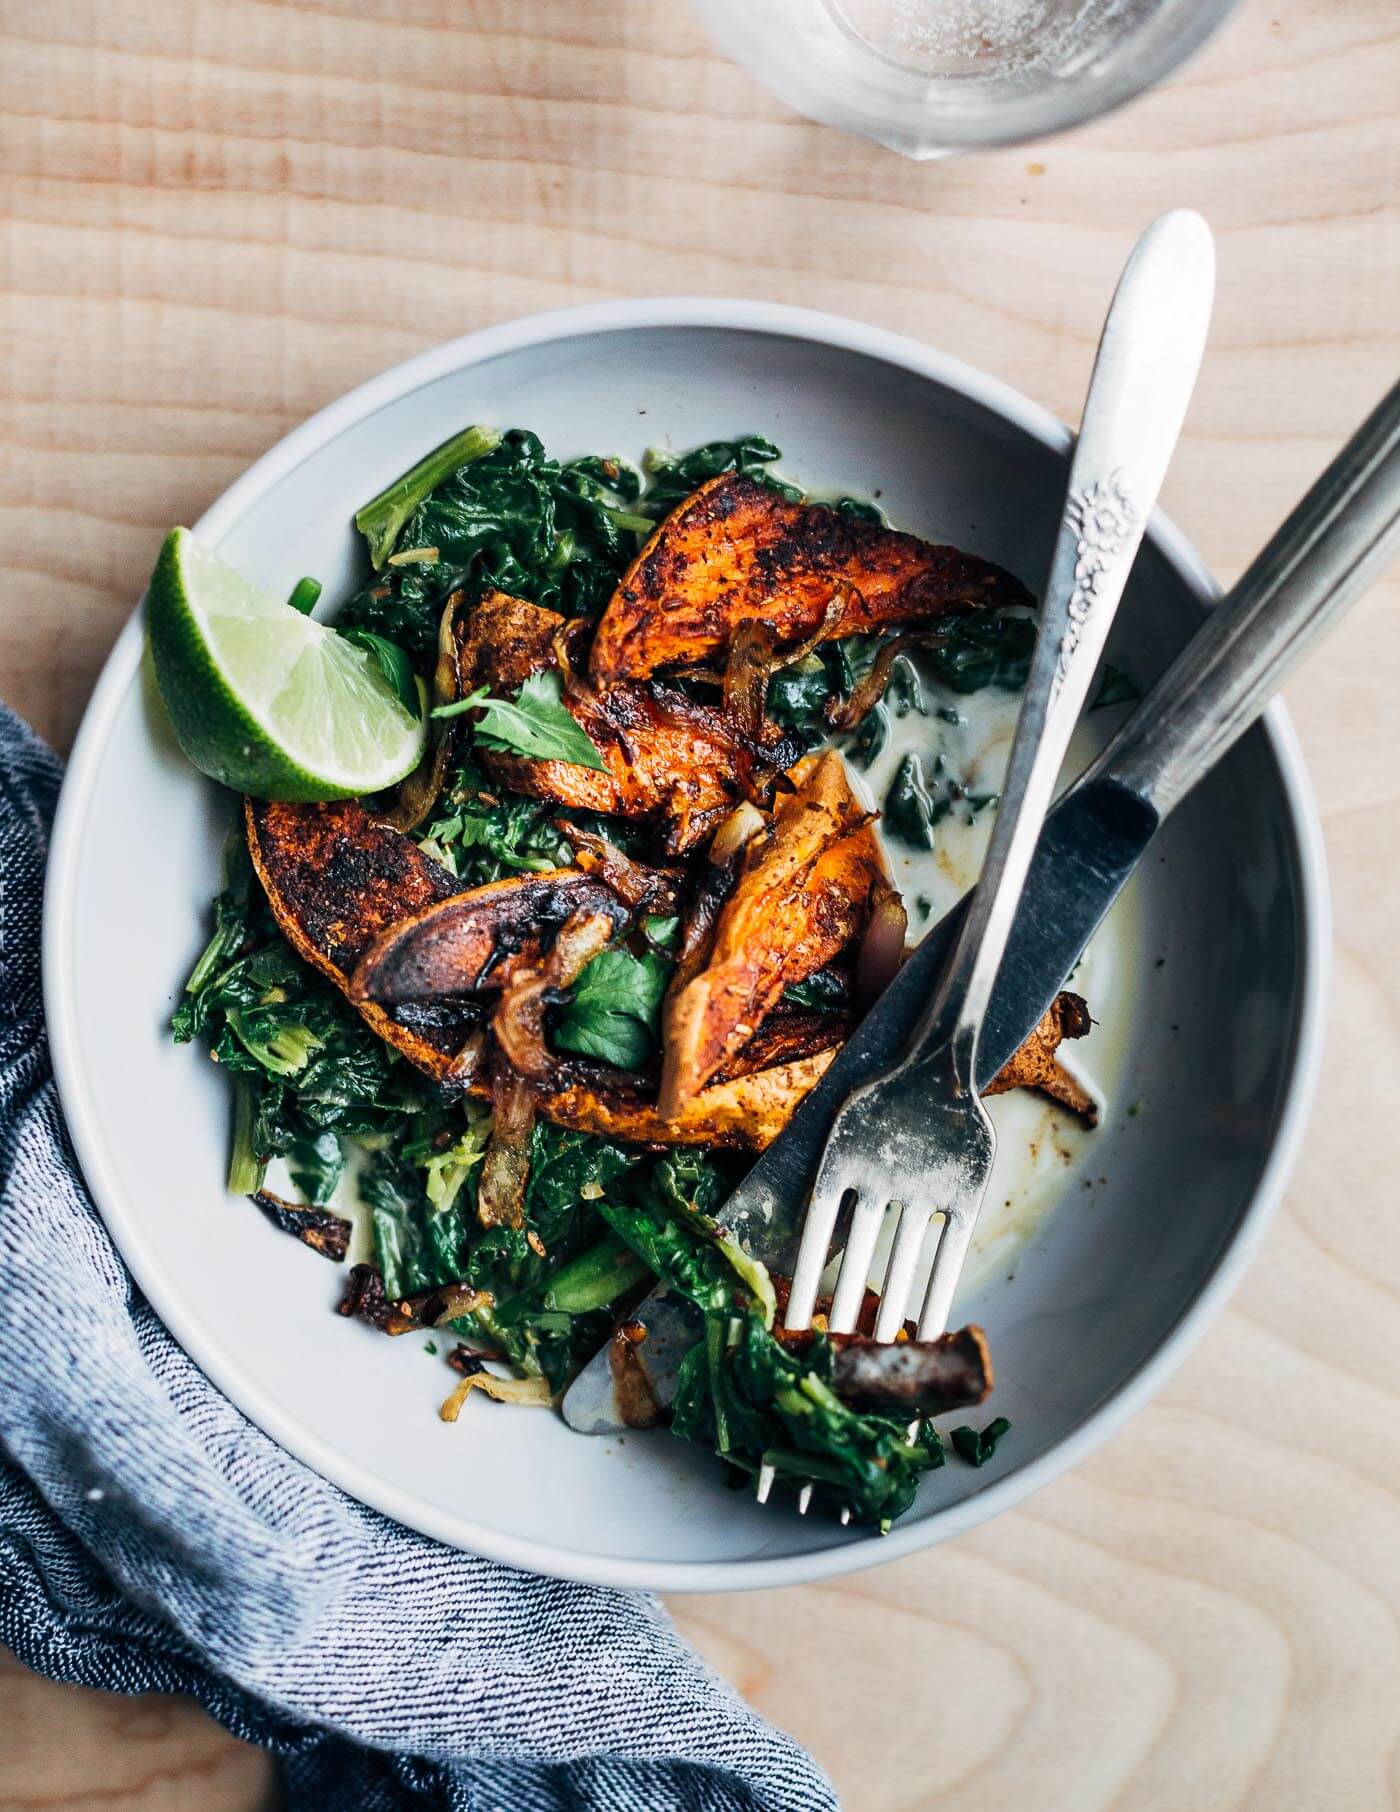 A simple approach to meltingly delicious cooked greens featuring spiced roasted sweet potato wedges and tender coconut milk braised greens with just a bit of heat.